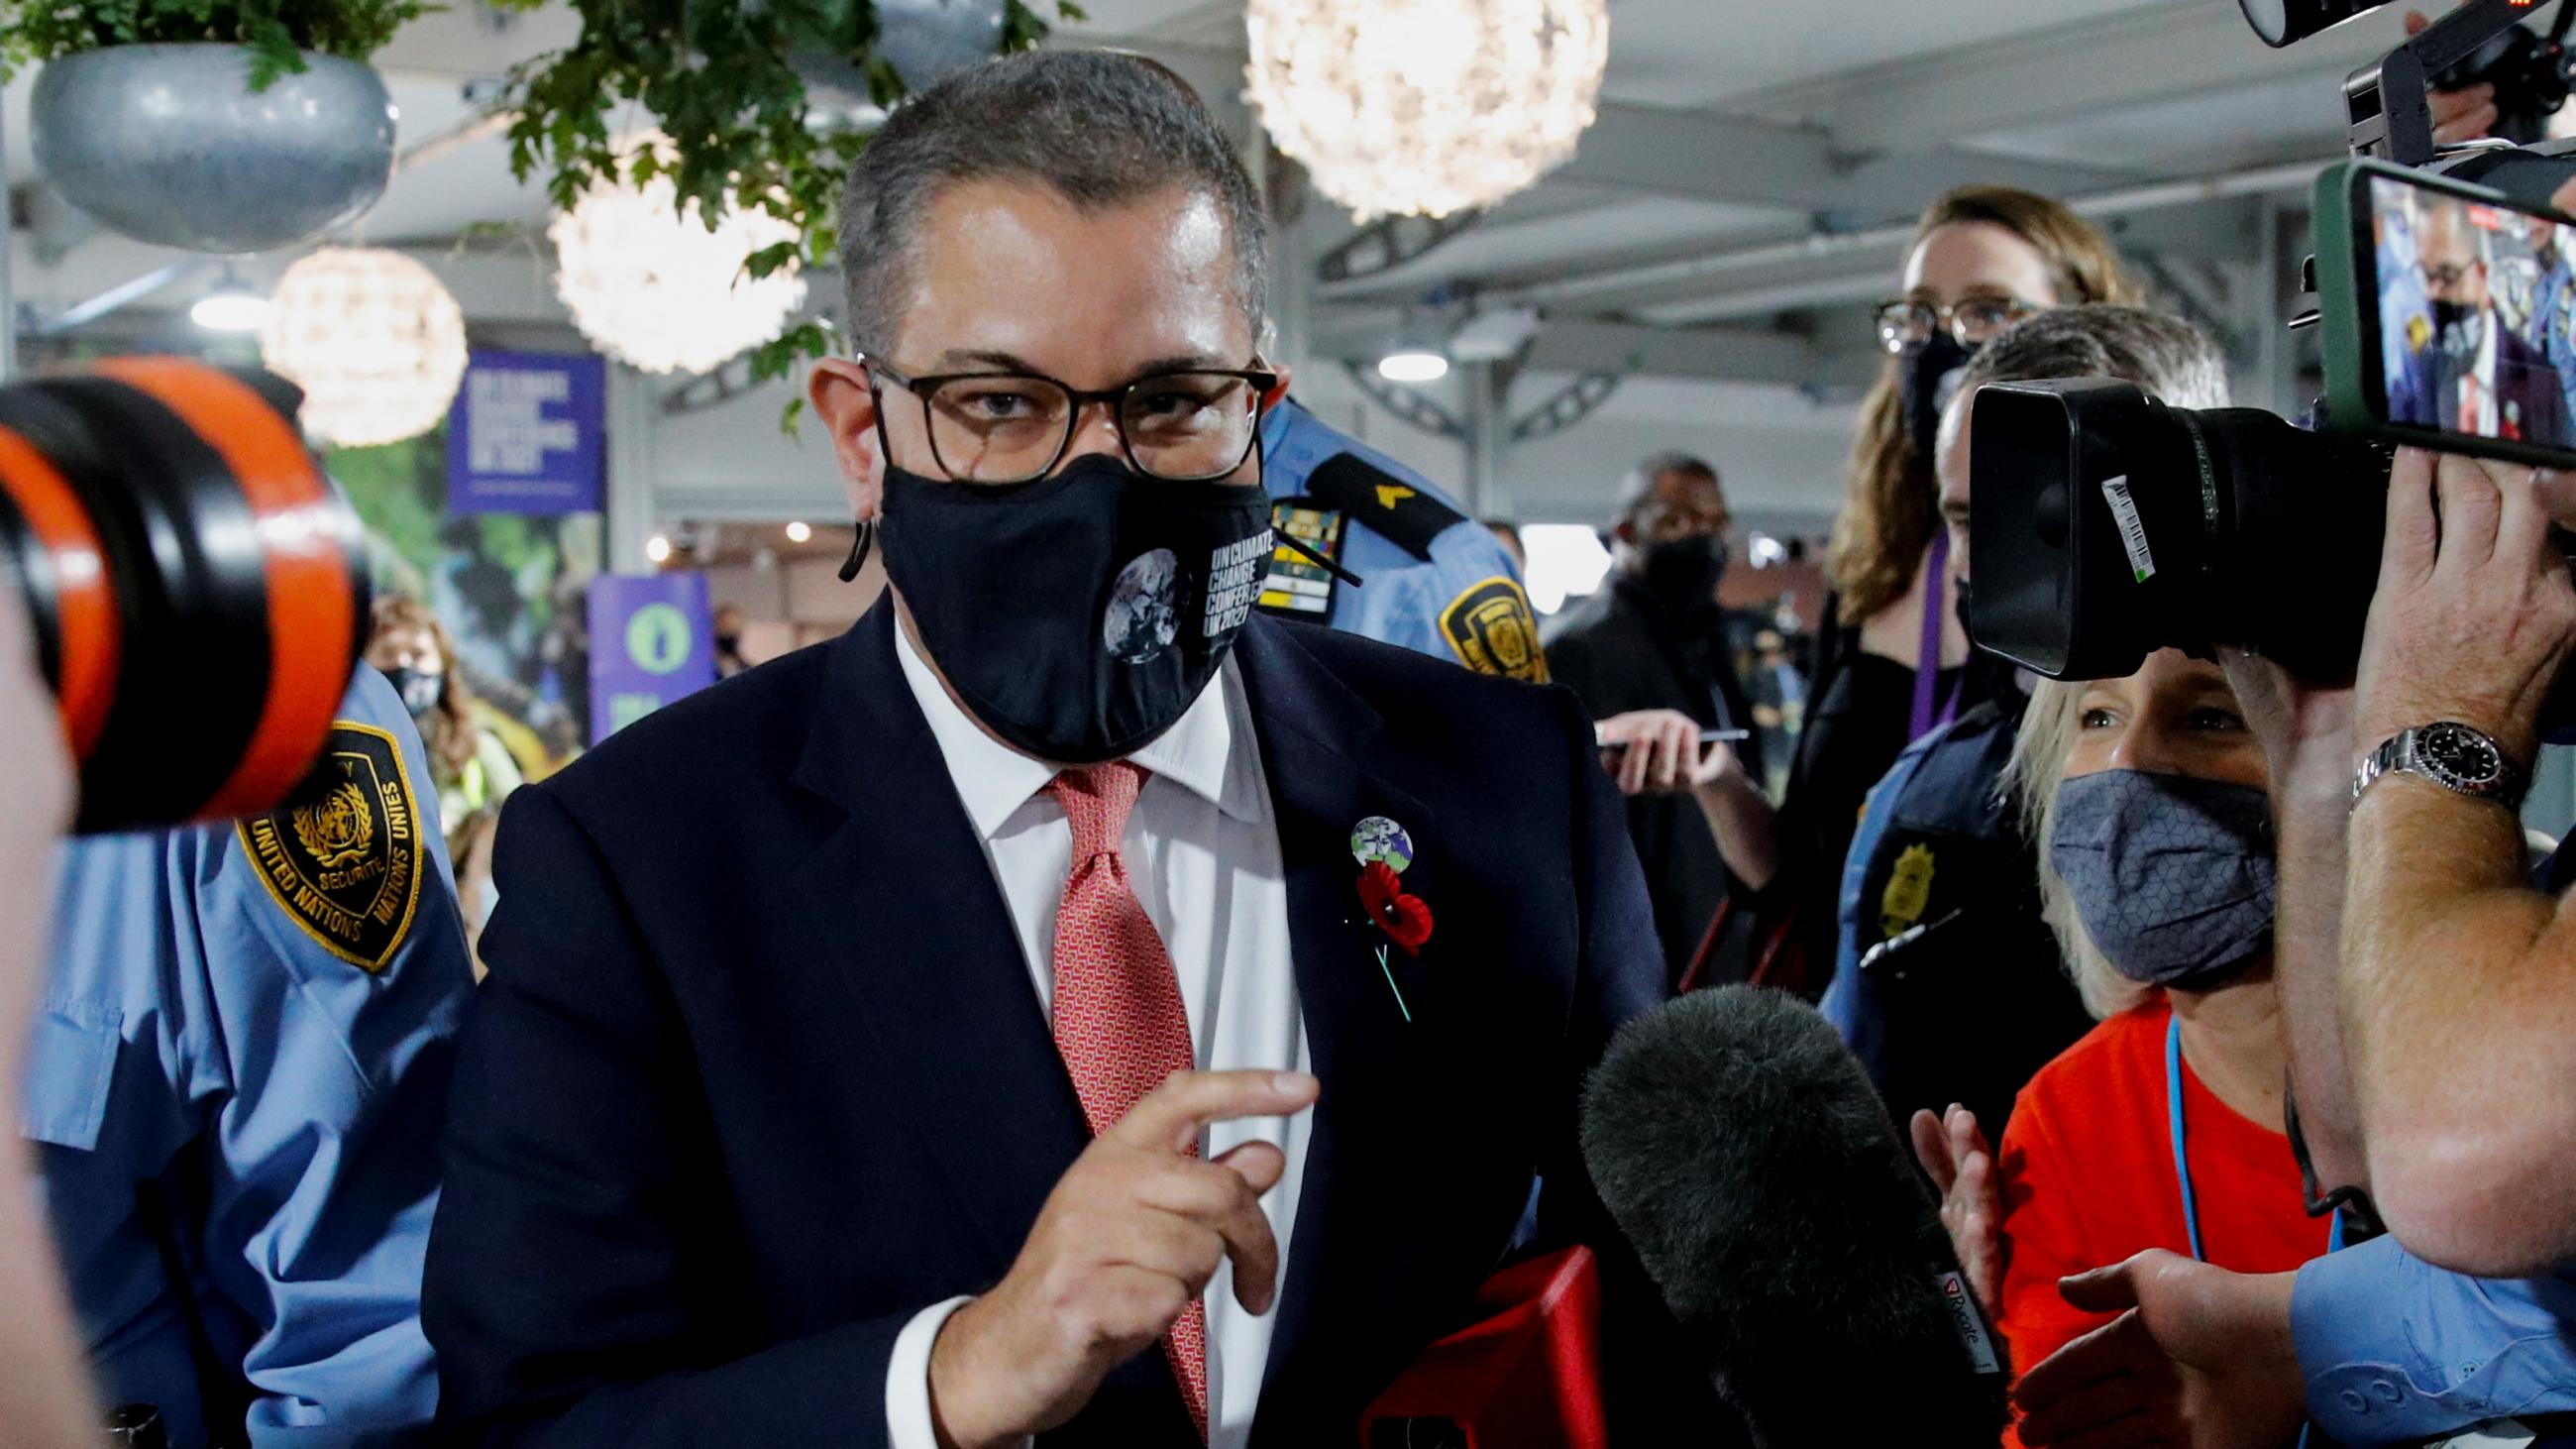 The President of the UN Climate Change Conference (COP26), Alok Sharma, talks to the media as he walks through the conference center in Glasgow.